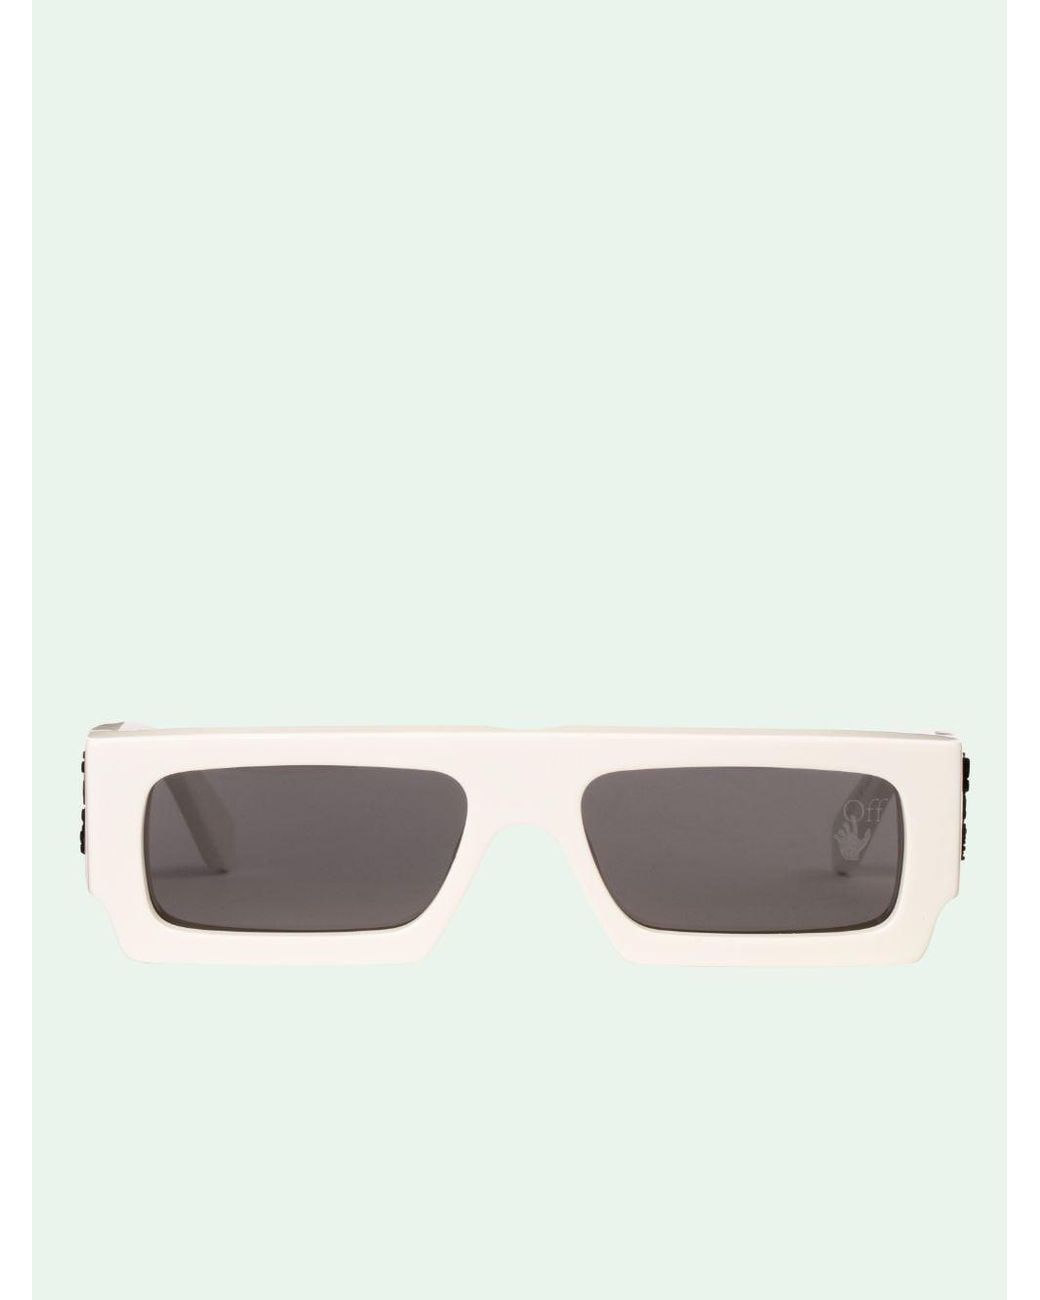 Off-White c/o Virgil Abloh x Sunglass Hut 'For Your Eyes Only